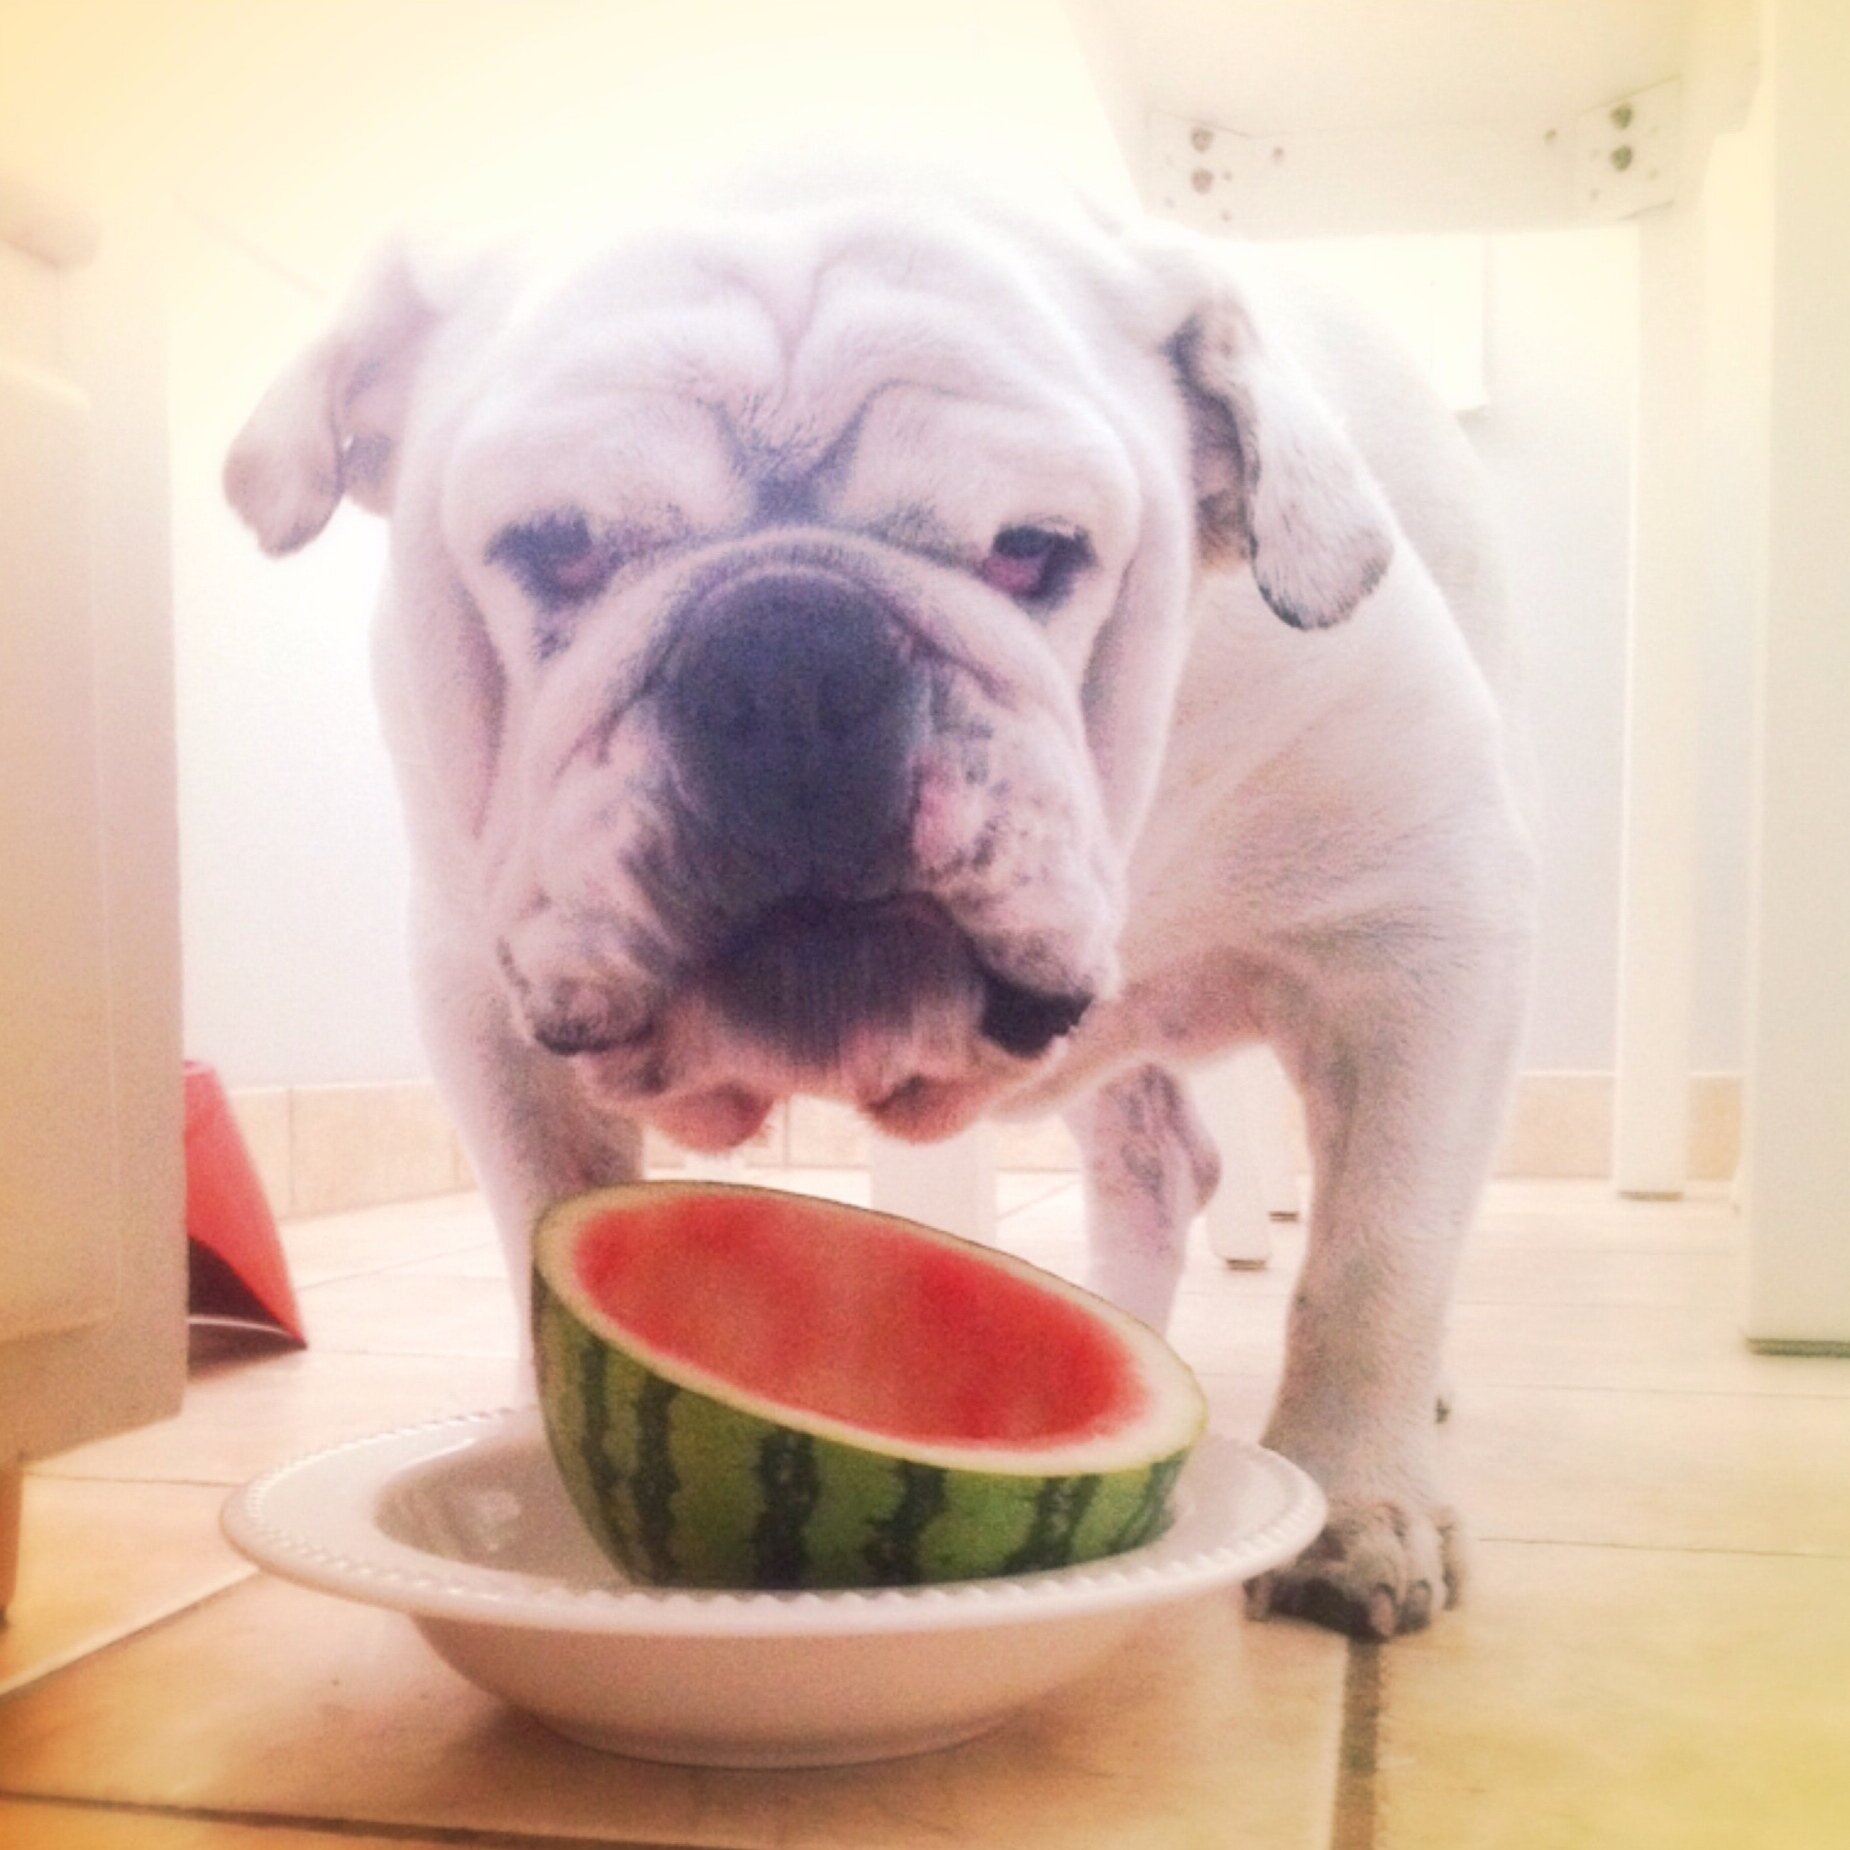 Cookie Eating Watermelon in the Kitchen